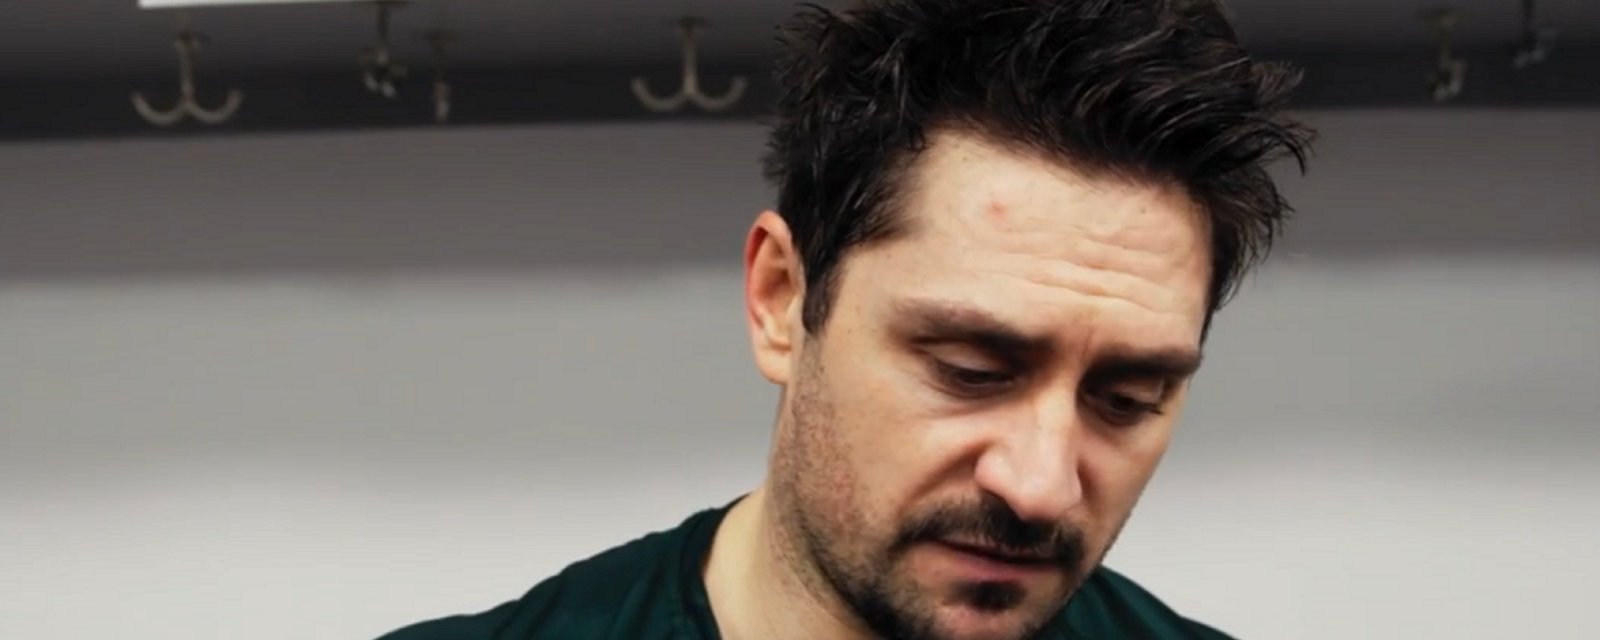 Zuccarello responds after being booed off the ice at home.